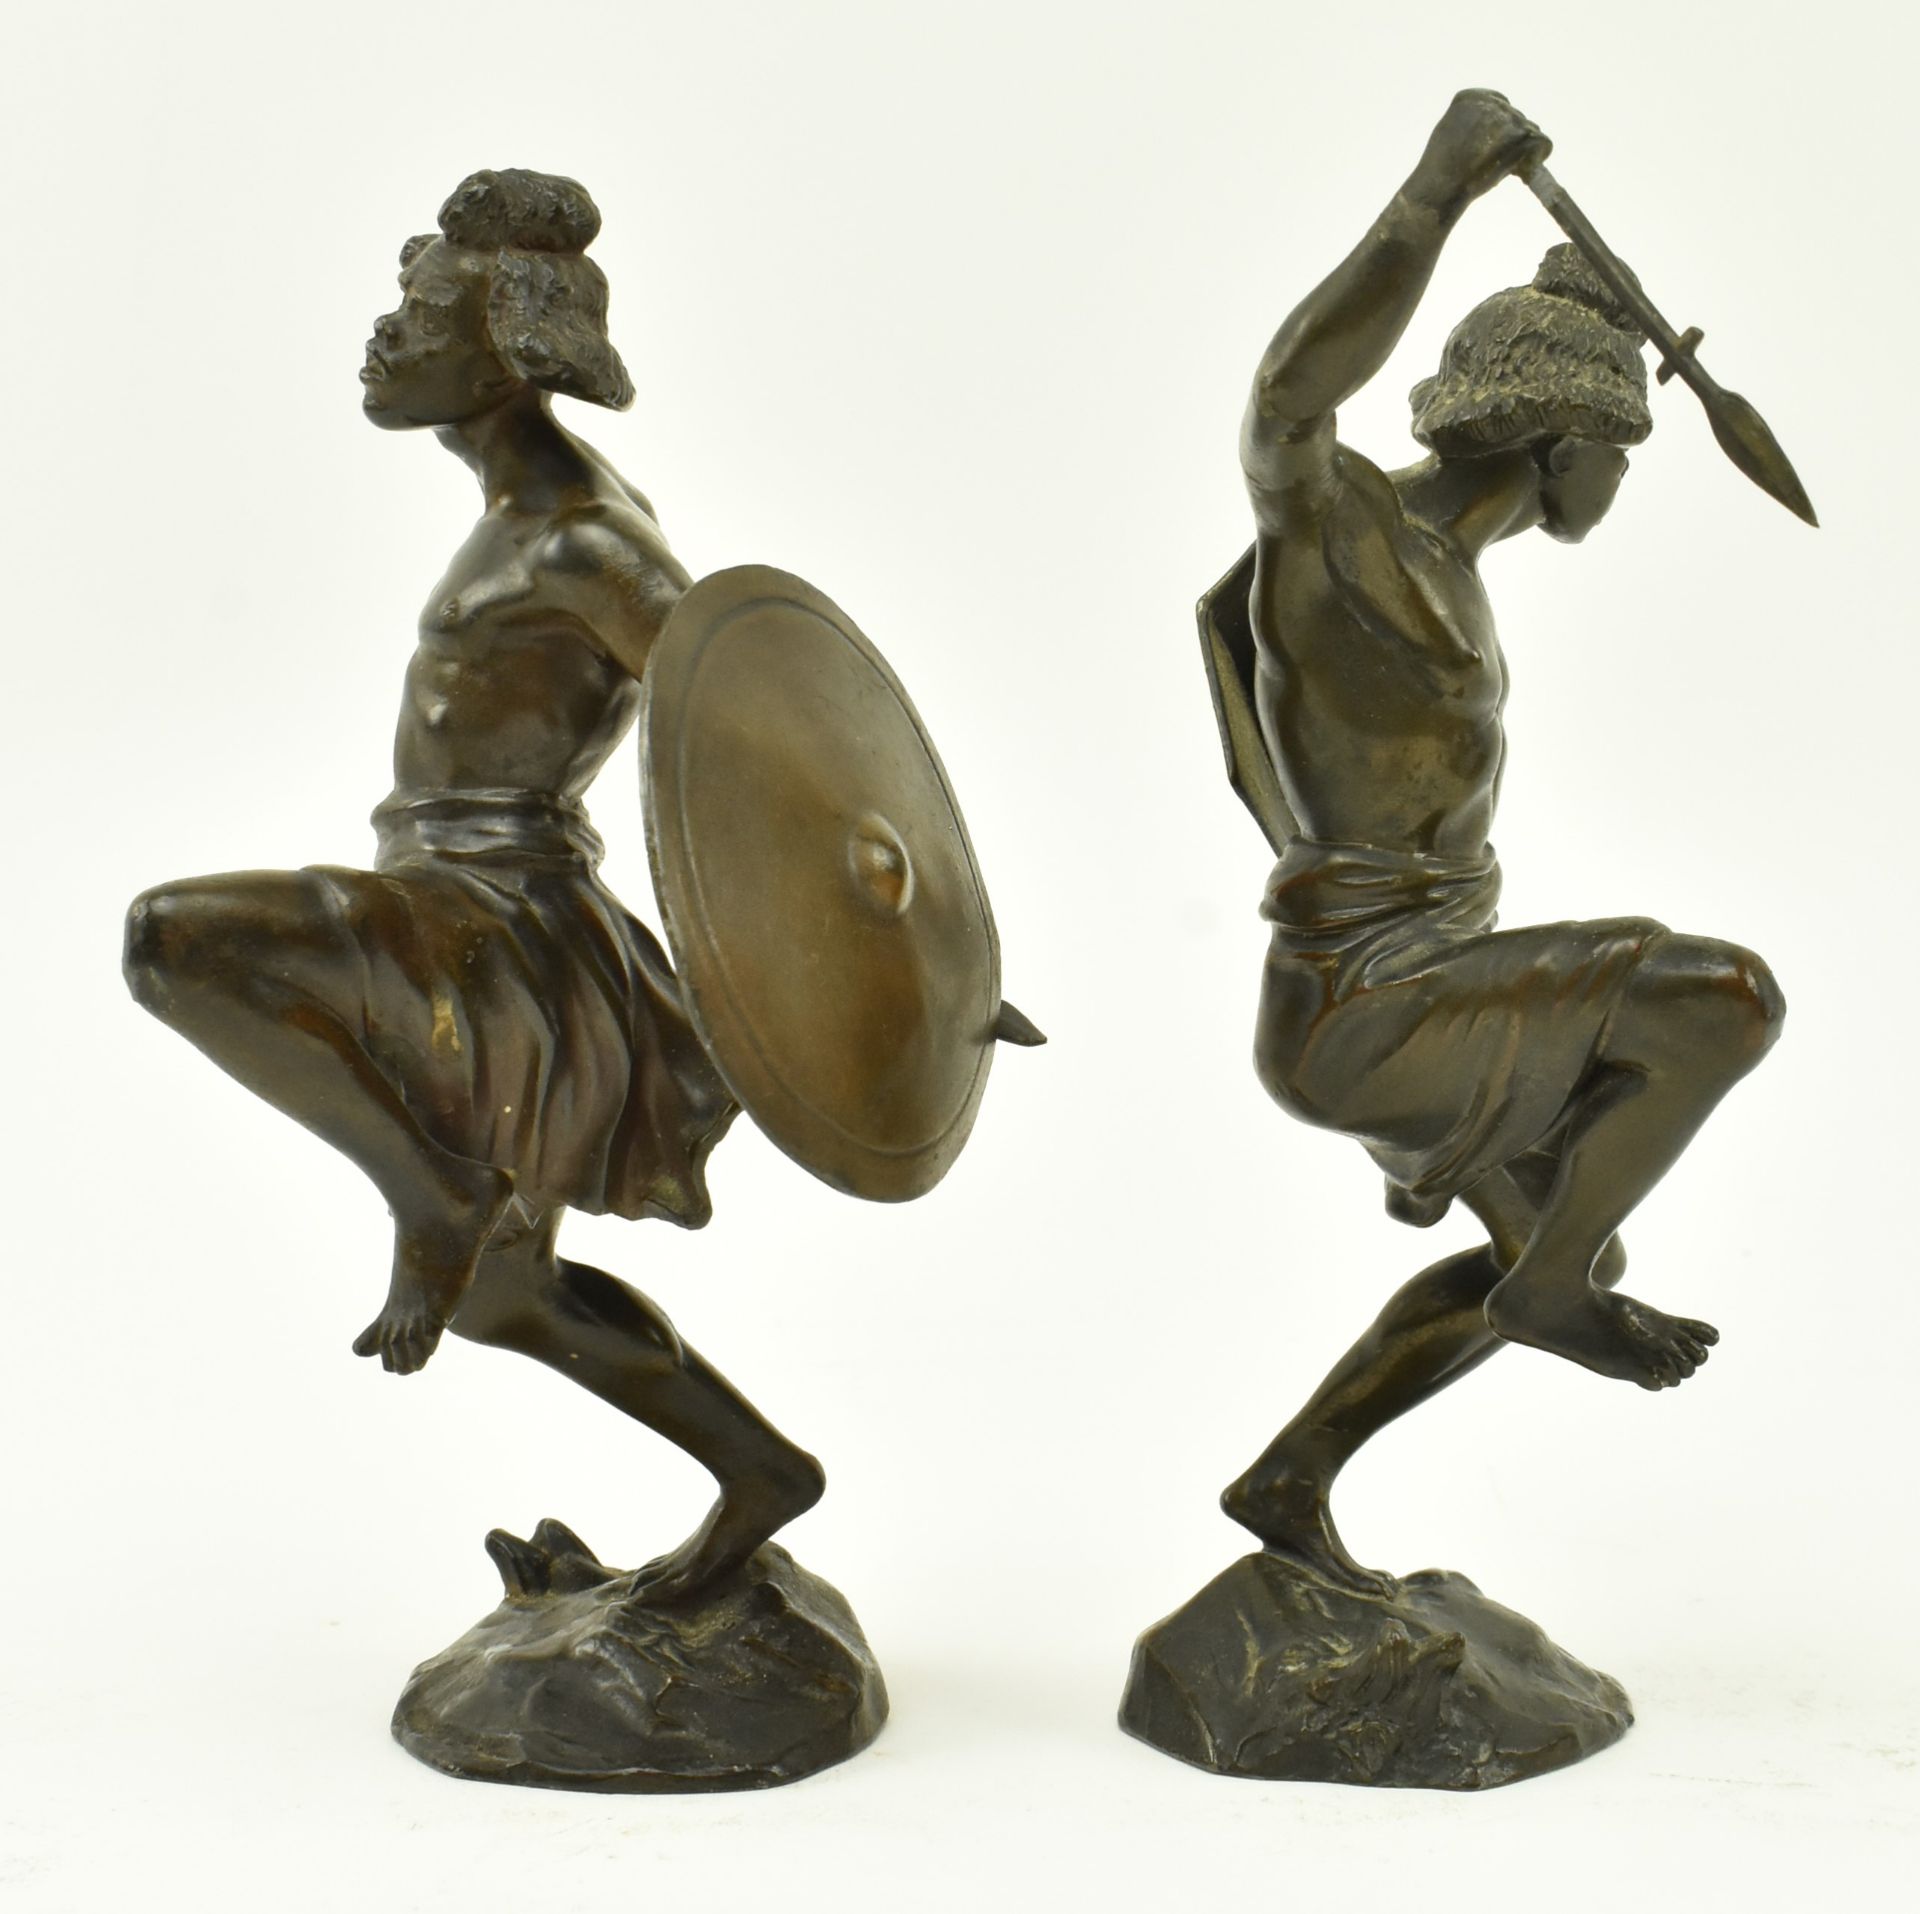 PAIR OF SOUTH AMERICAN 19TH CENTURY BRONZE WARRIORS FIGURES - Image 4 of 5